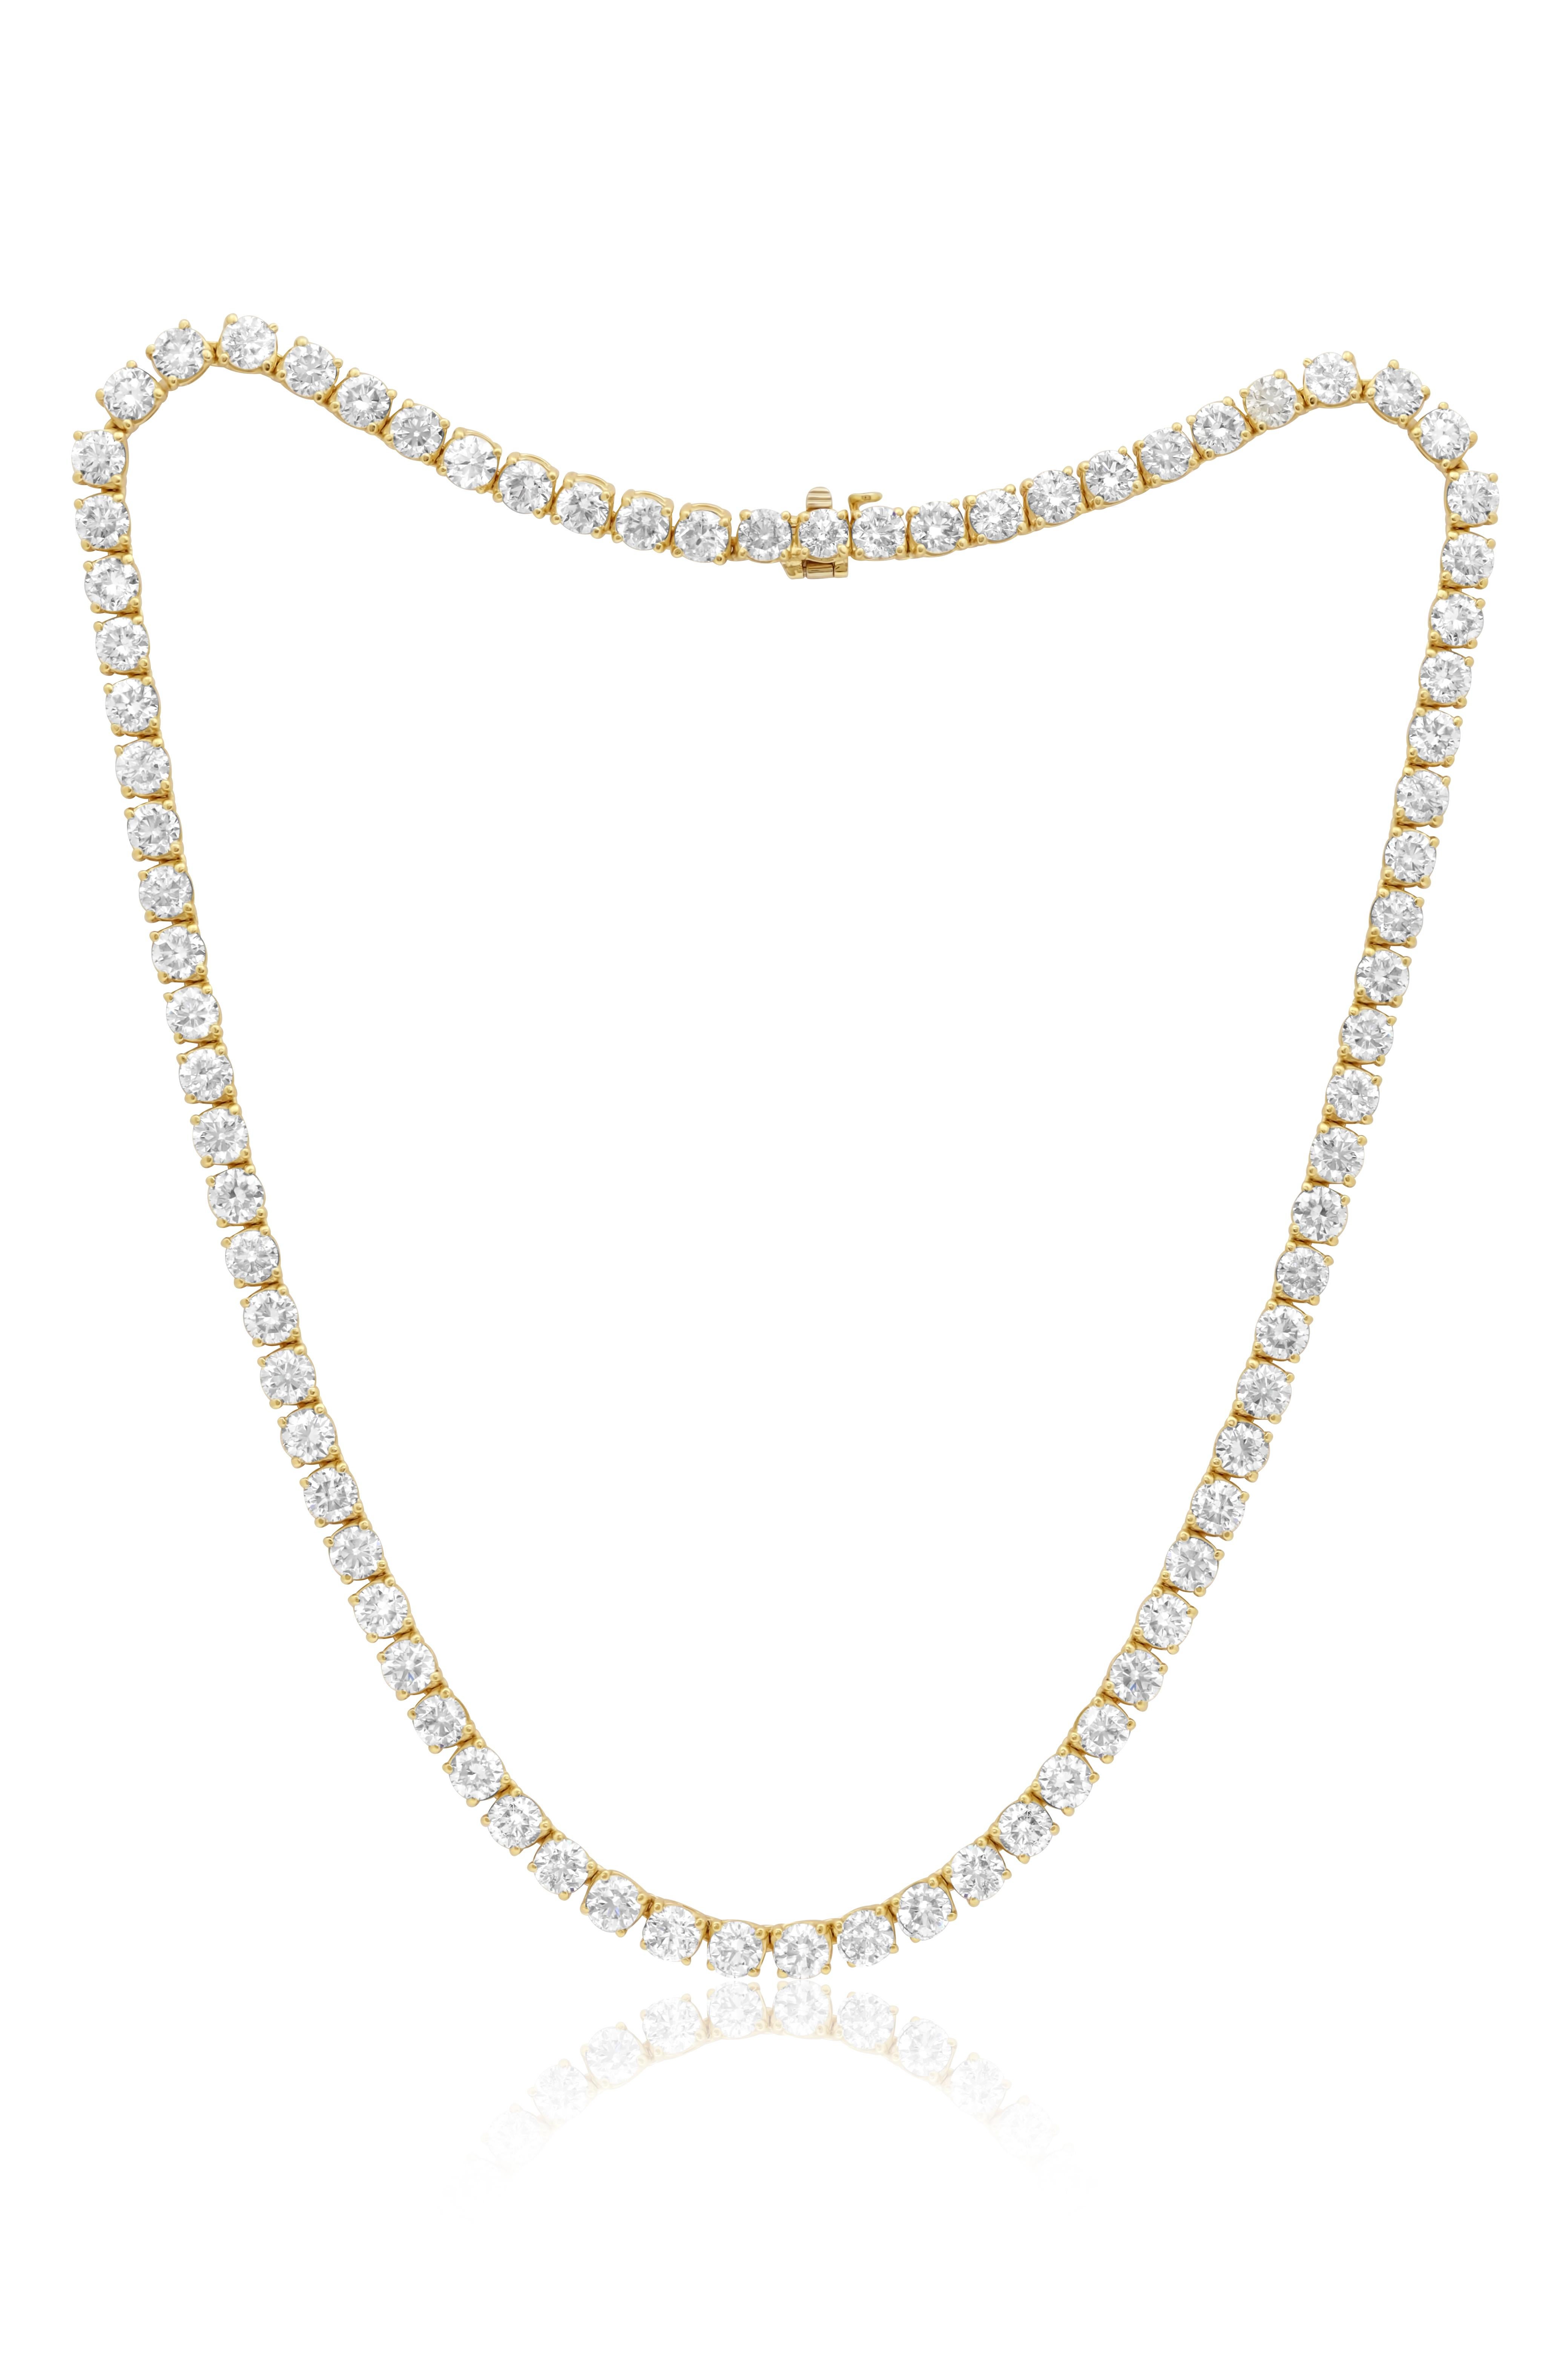 Round Cut Diana M. Custom 7.00 cts Round 4 Prong Diamond 14K Yellow Gold Tennis Necklace  For Sale